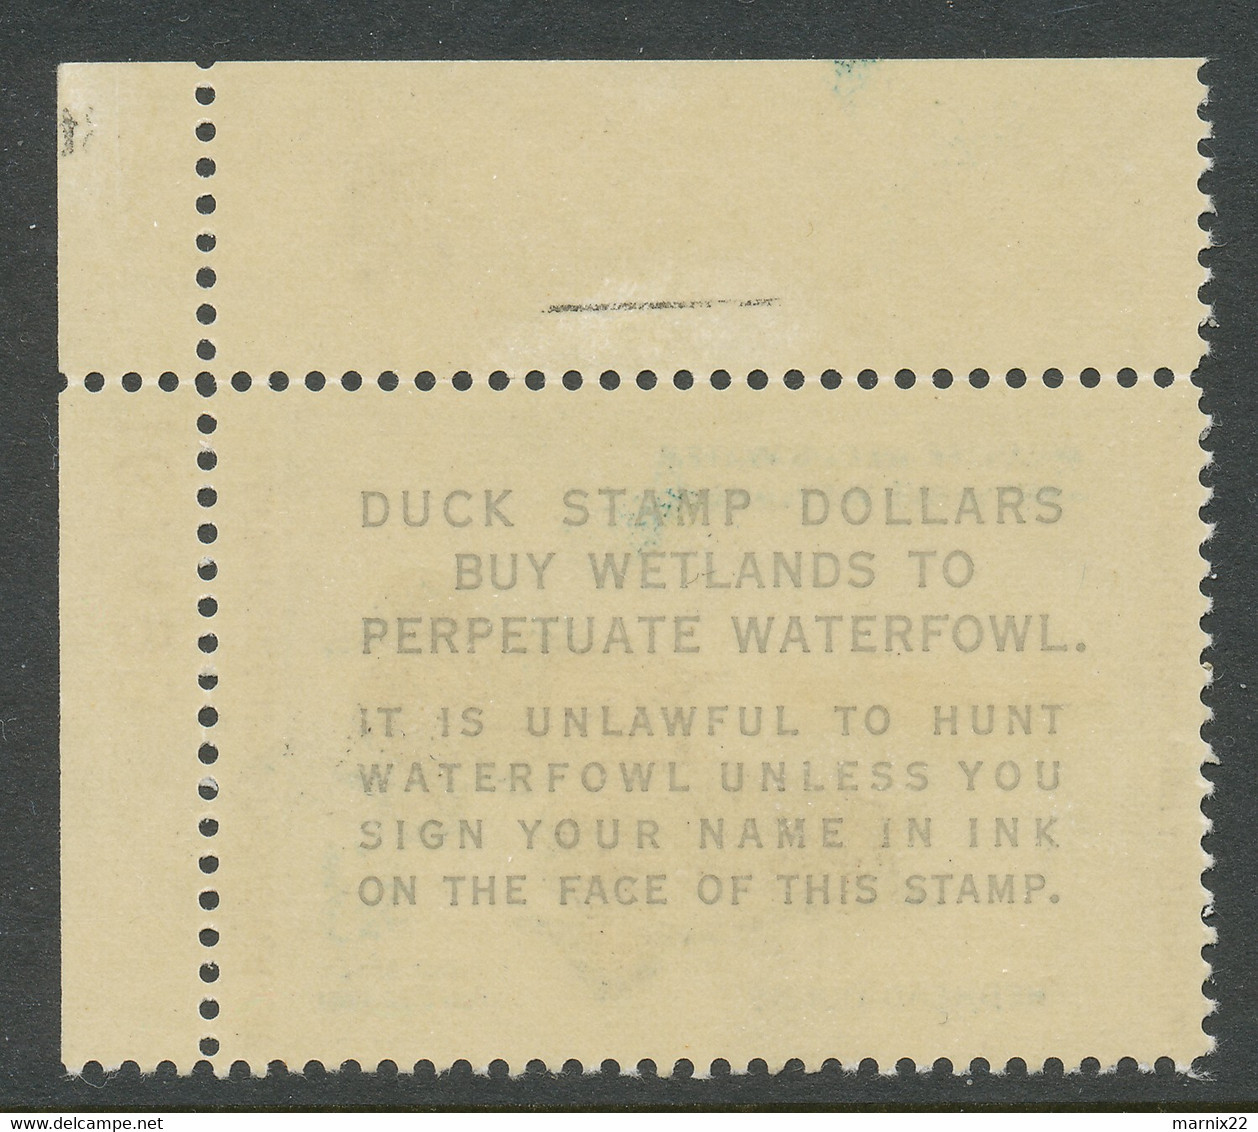 HUNTING PERMIT STAMP - DUCKSTAMP 1960 - MNH - (RW27) - Duck Stamps